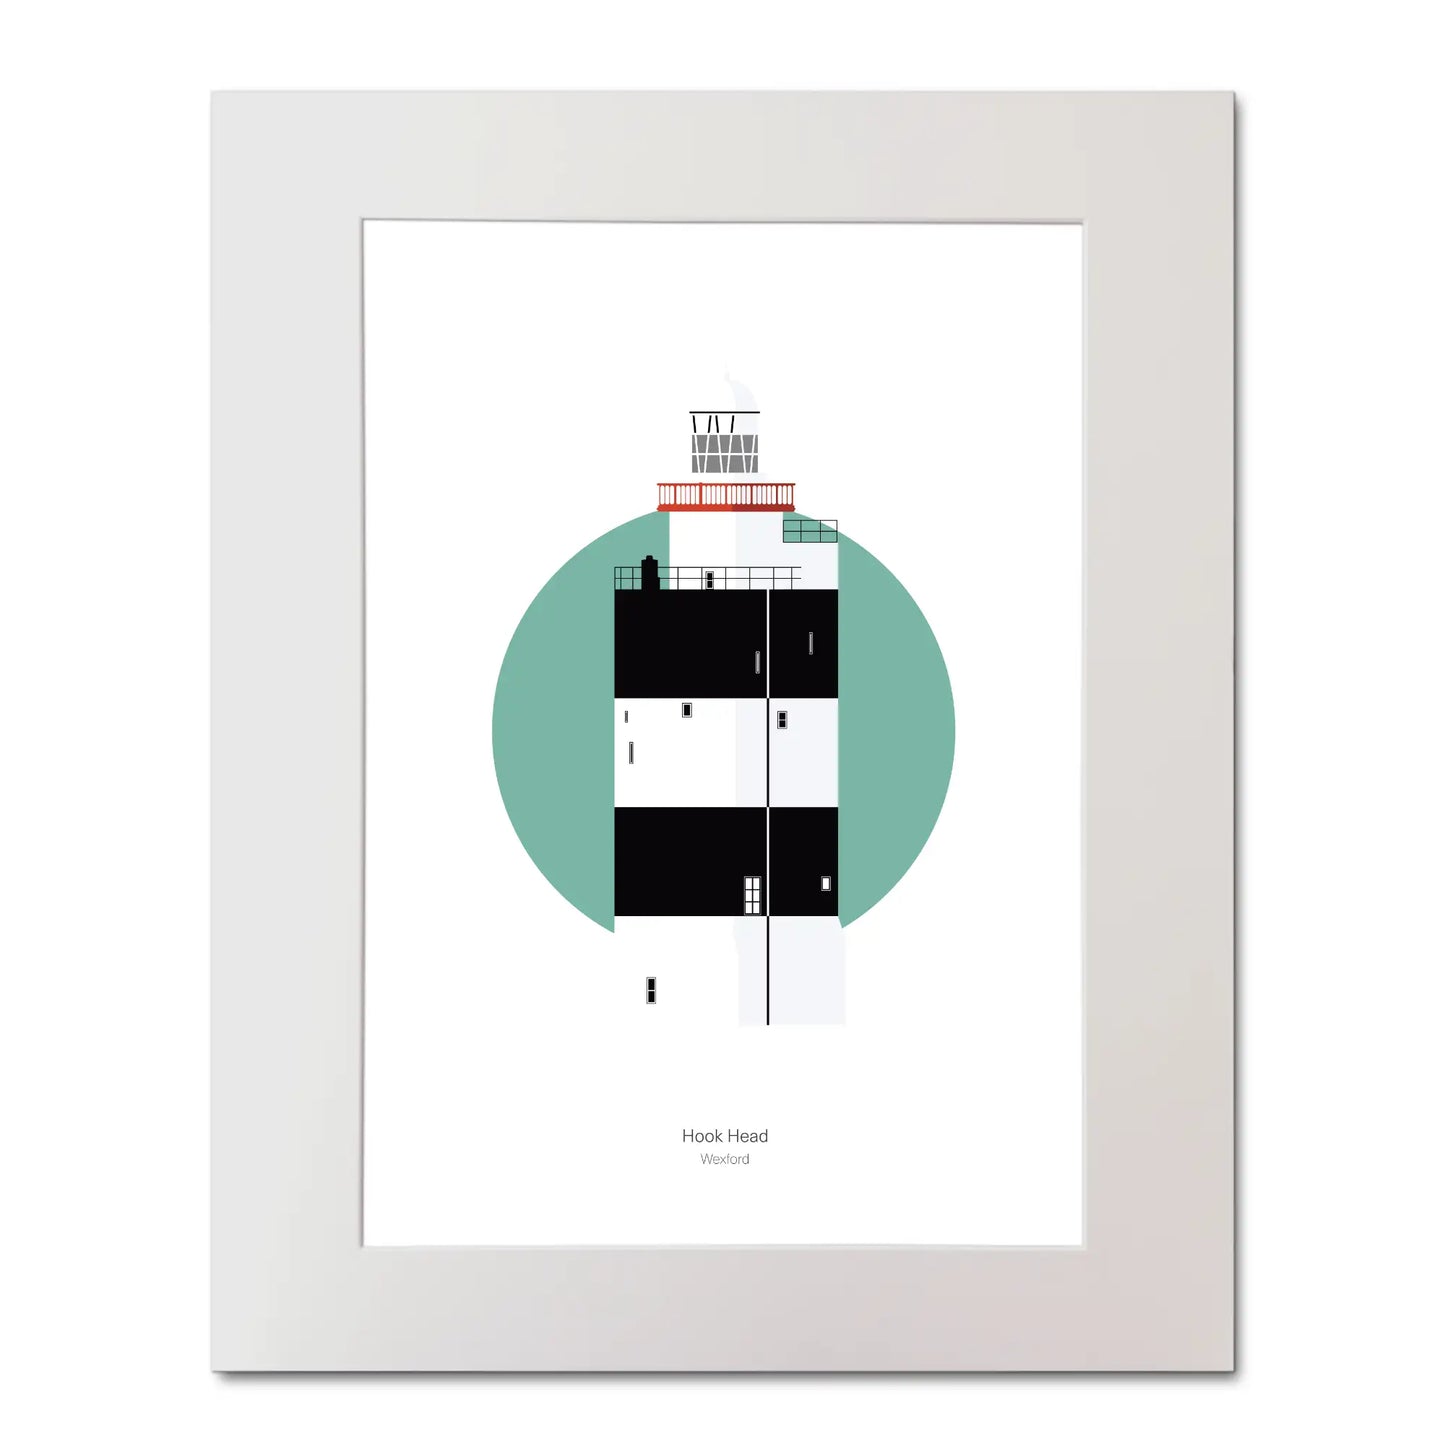 Illustration of Hook Head lighthouse on a white background inside light blue square, mounted and measuring 40x50cm.